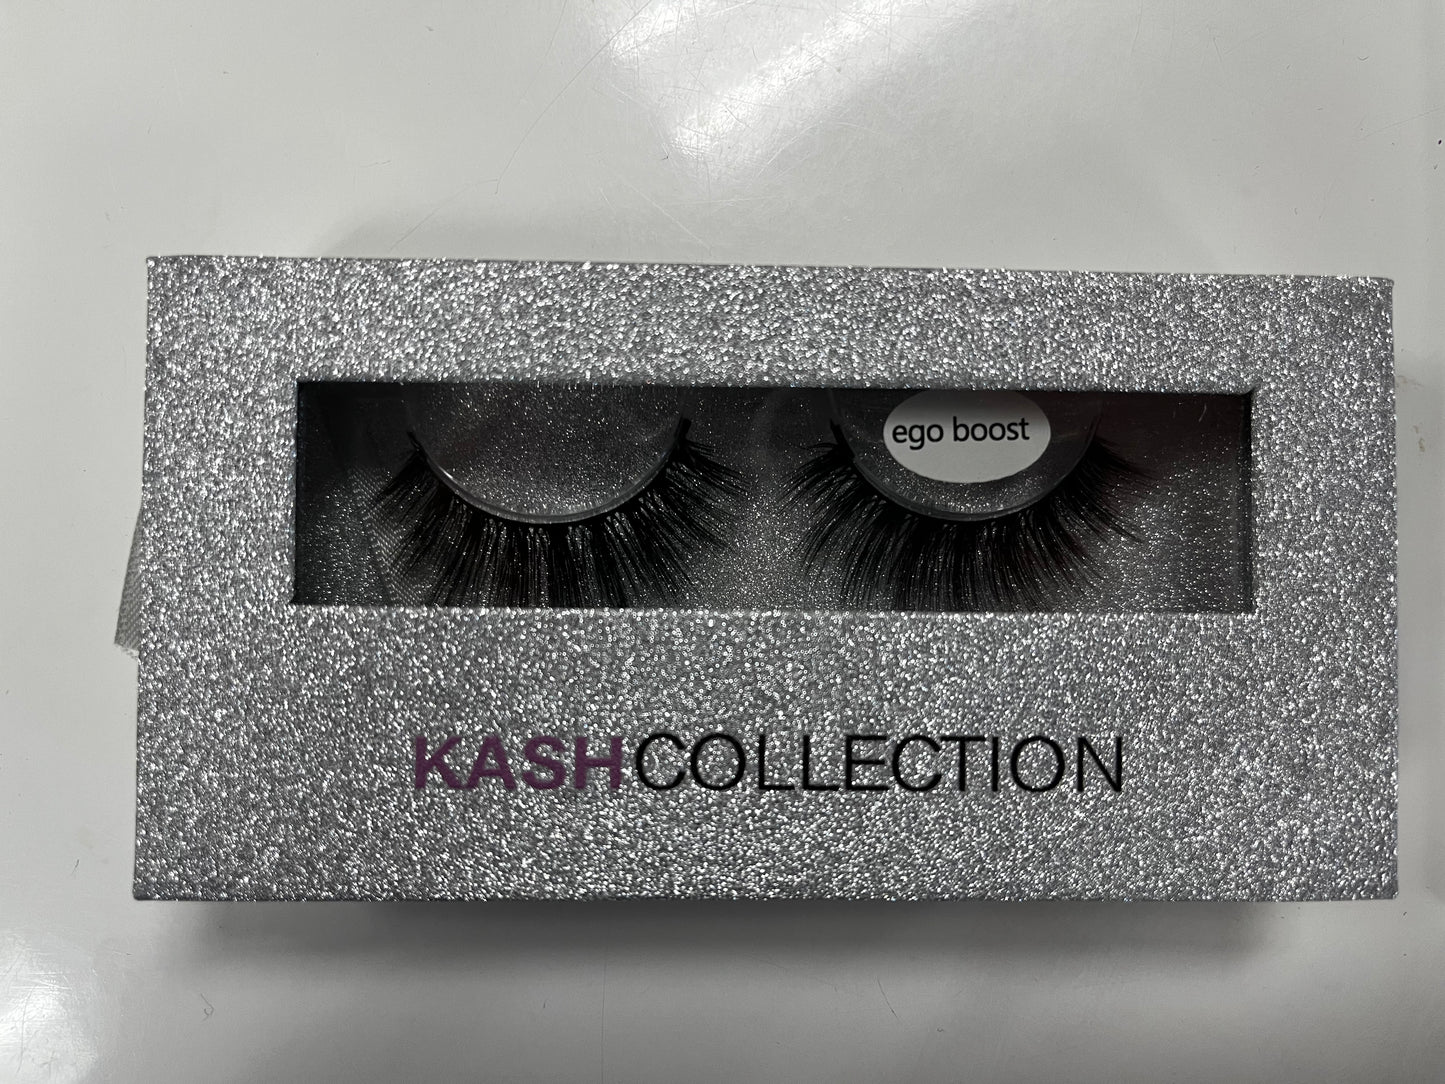 The Kash Collection Ego Boost